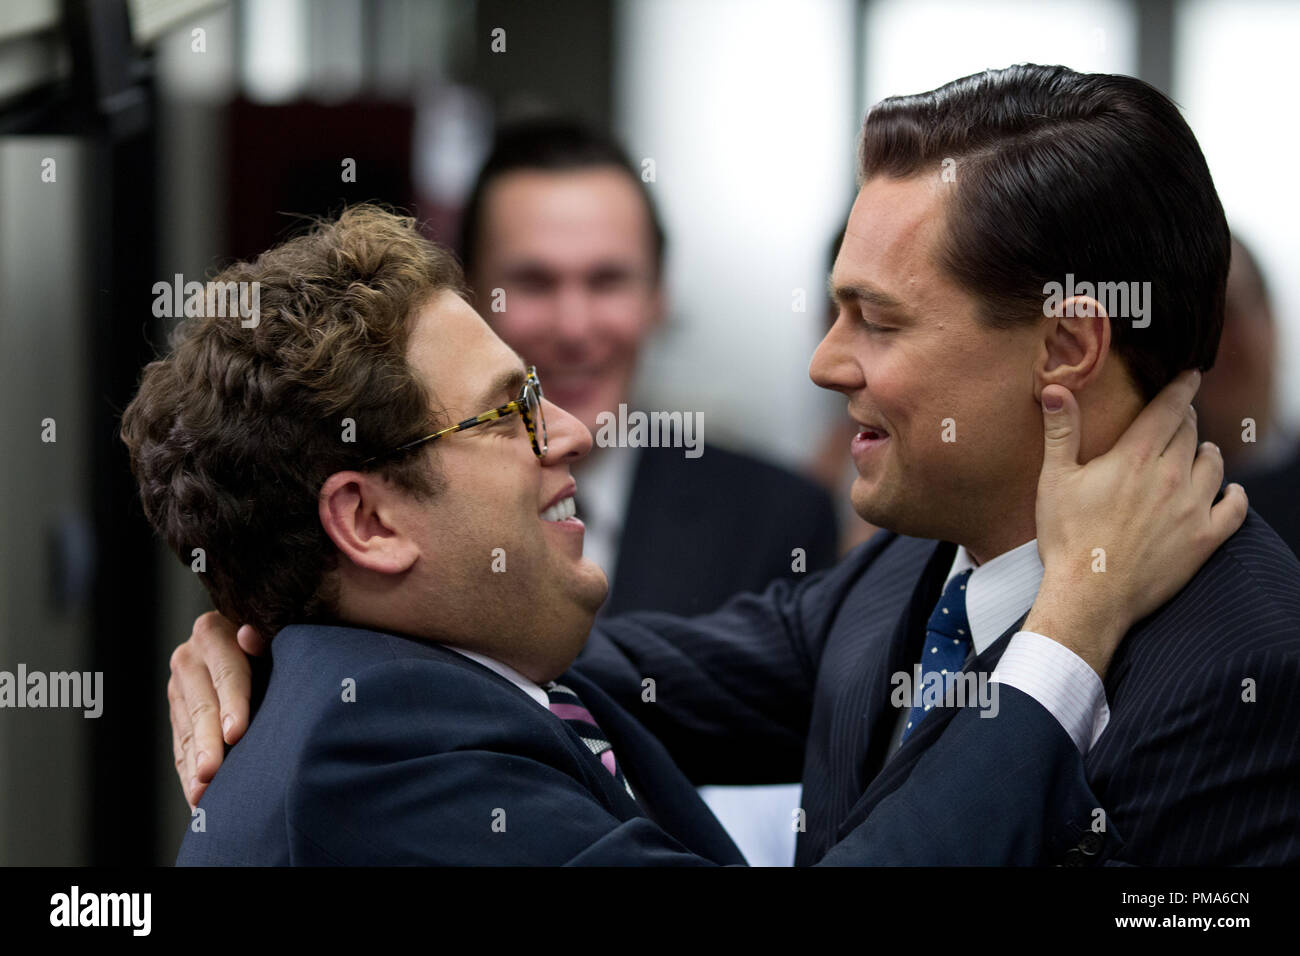 Left to right: Jonah Hill plays Danny and Leonardo DiCaprio plays Jordan  Belfort in THE WOLF OF WALL STREET, from Paramount Pictures and Red Granite  Pictures Stock Photo - Alamy